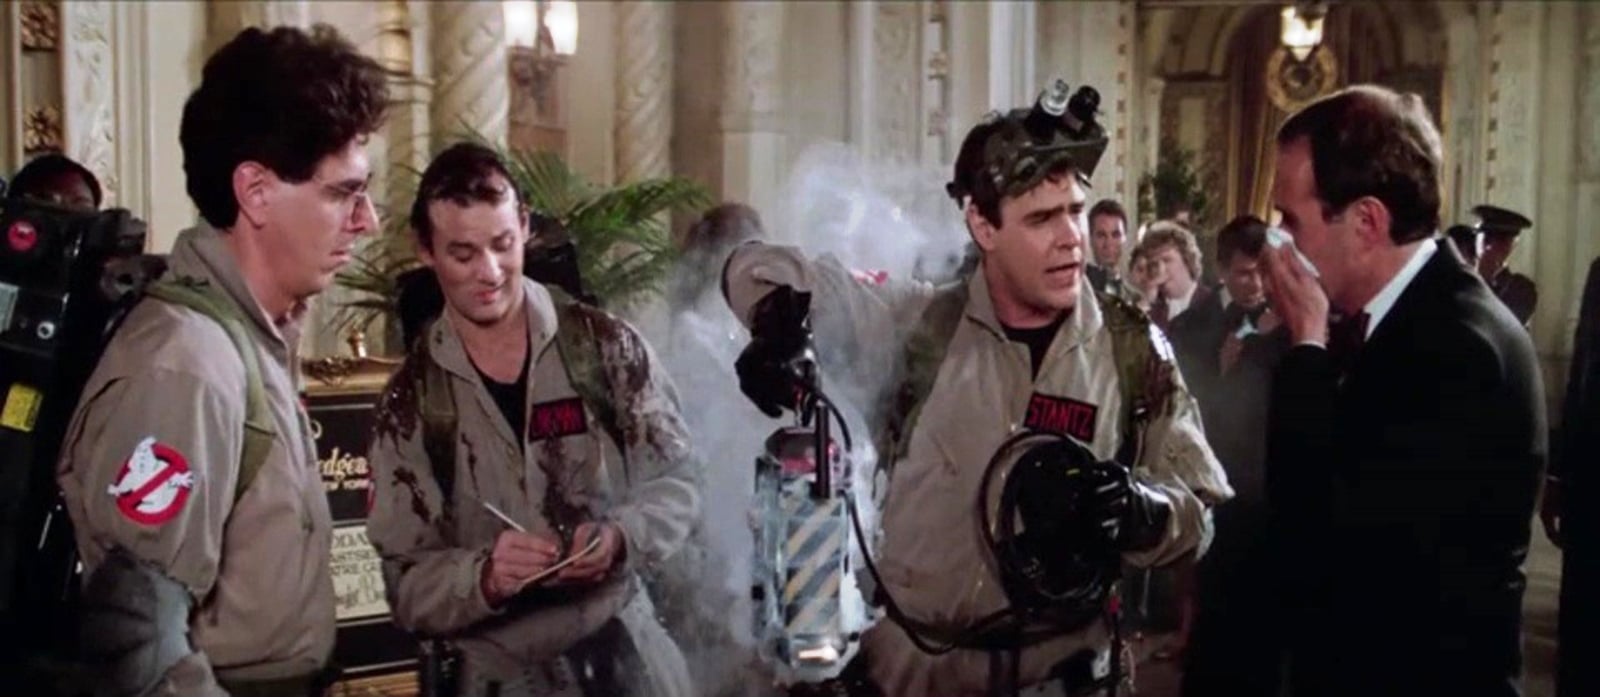 smoke is in the air as the 3 ghostbusters deploy a trap